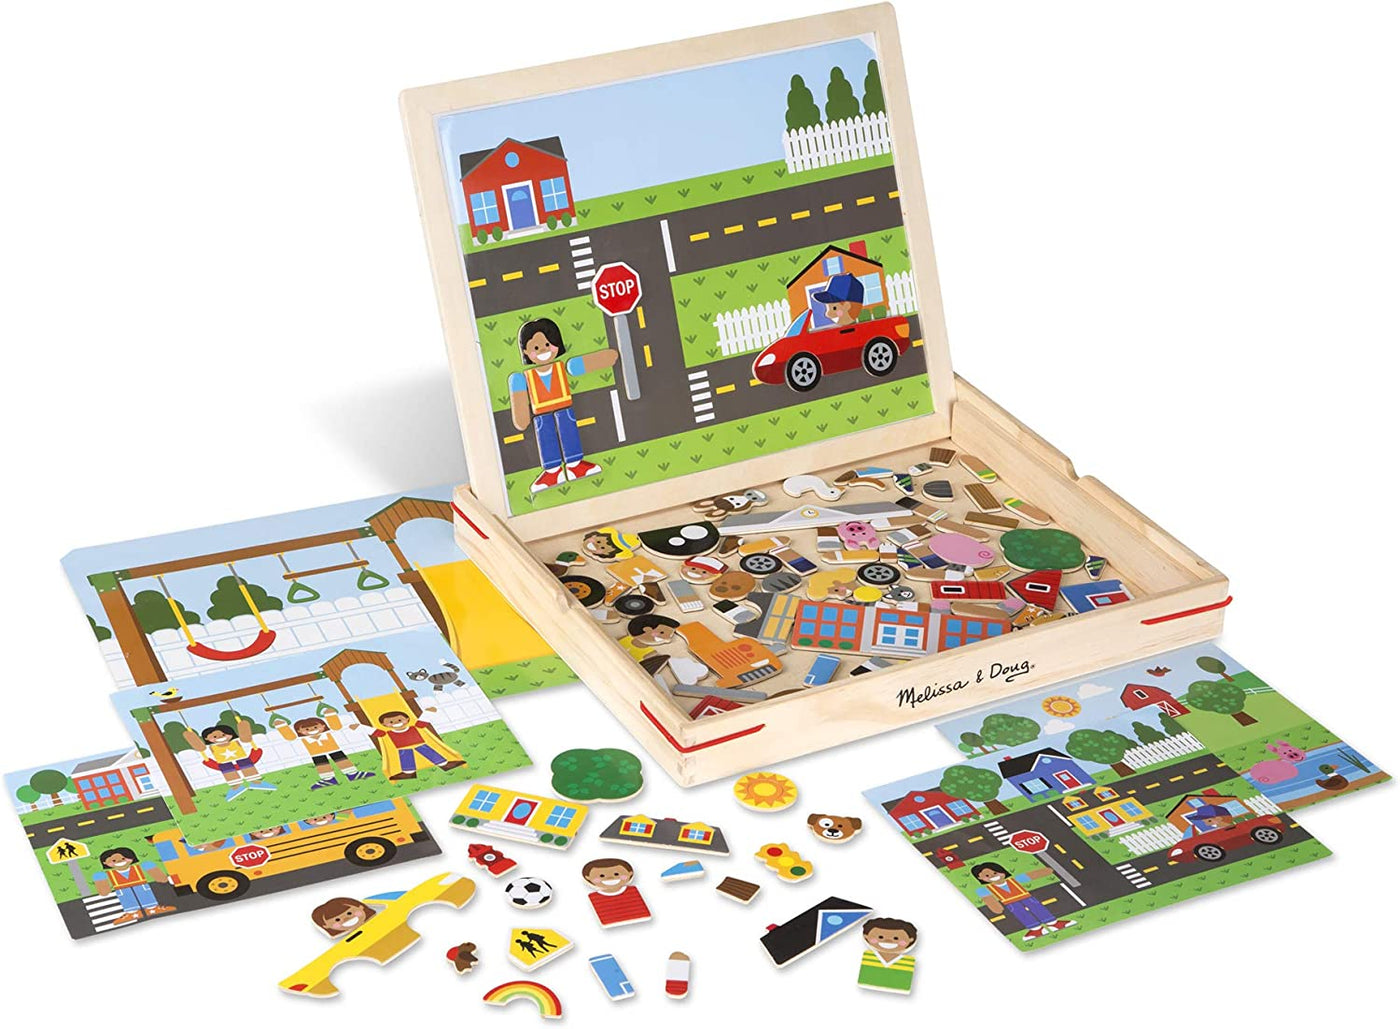 Earthlets.com| Melissa & Doug 19918 Wooden Matching Picture Game with 119 Magnets and Scene Cards, Multi-Colour | Earthlets.com |  